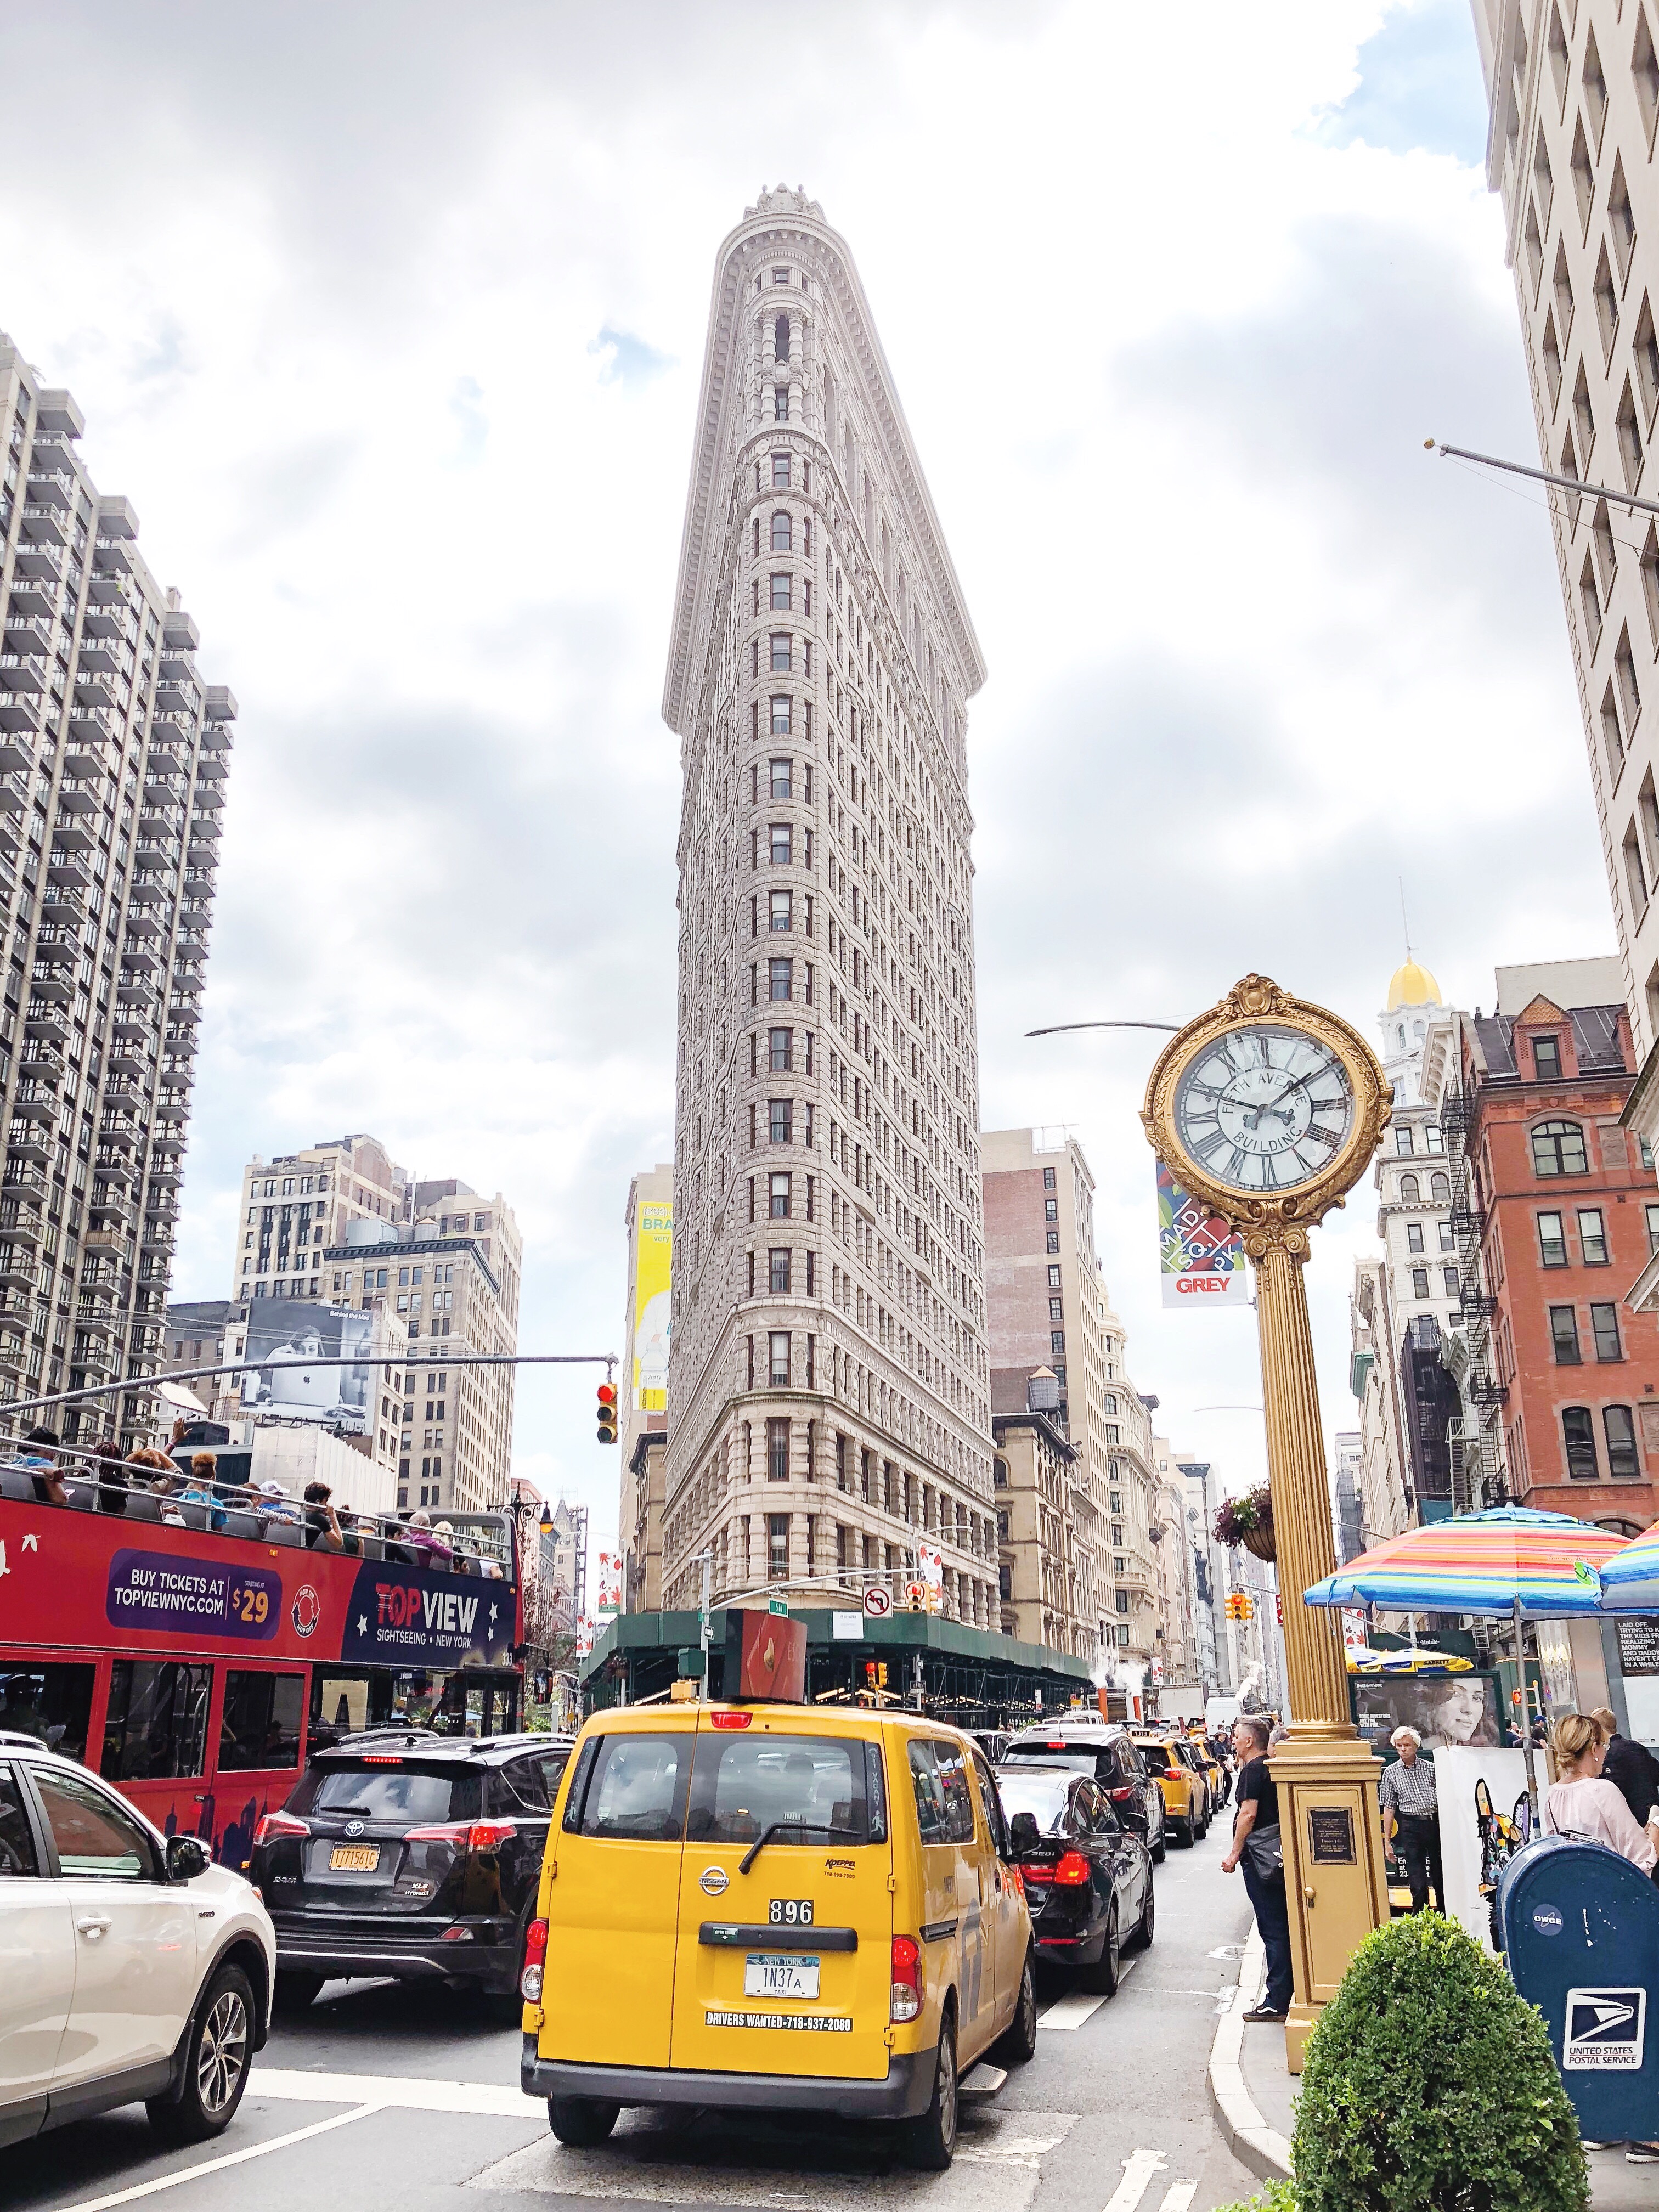 Complete travel guide to New York City. Includes a downloadable google maps which highlights the must explore, where to eat and insta-worthy spots. #newyork #travelguide #googlemap #downloadablemap #newyorkinsta